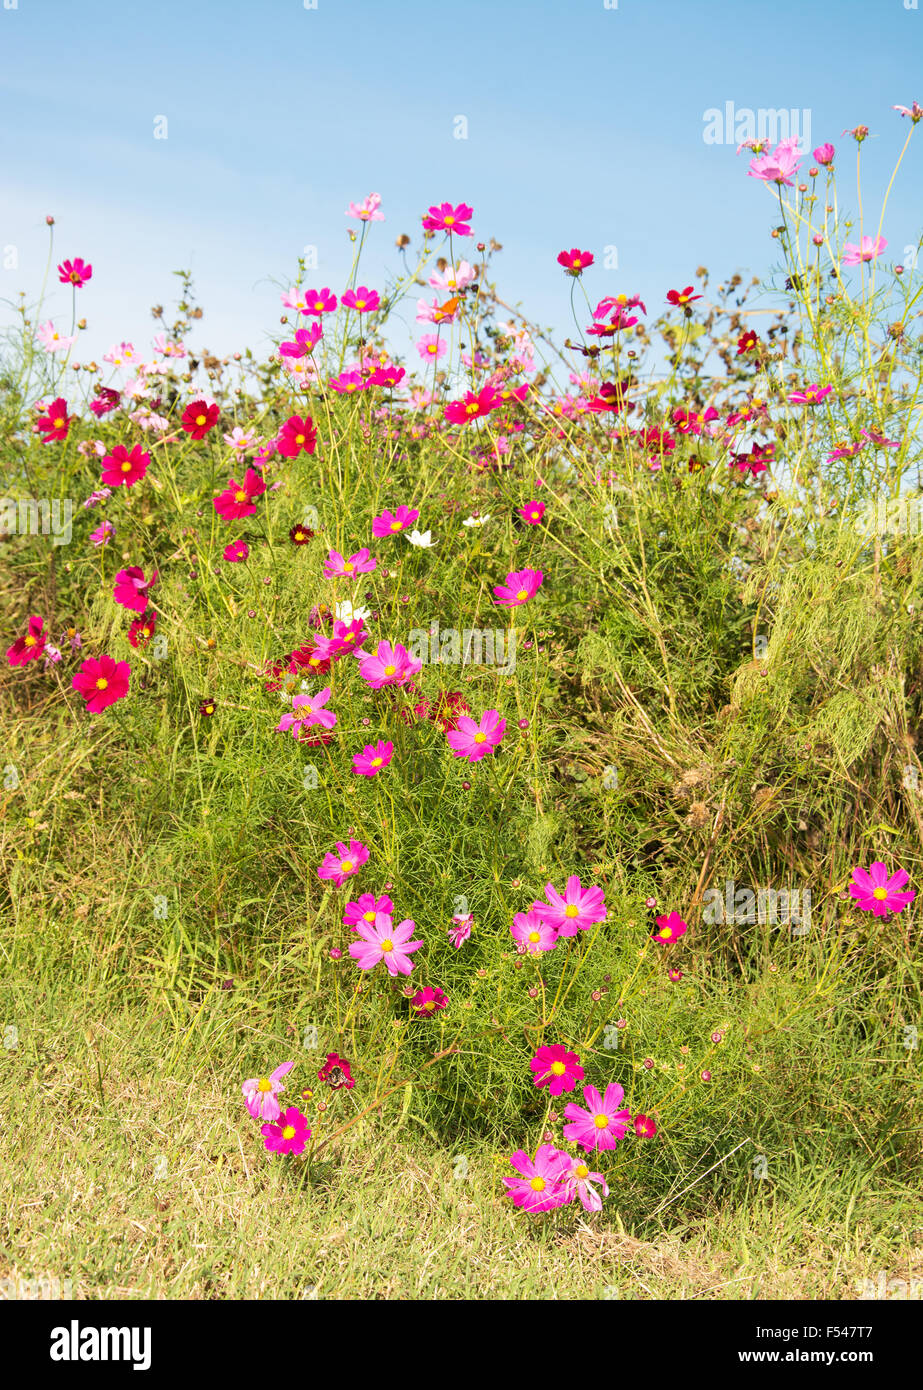 Cosmos flowers in different colors against blue autumn sky Stock Photo